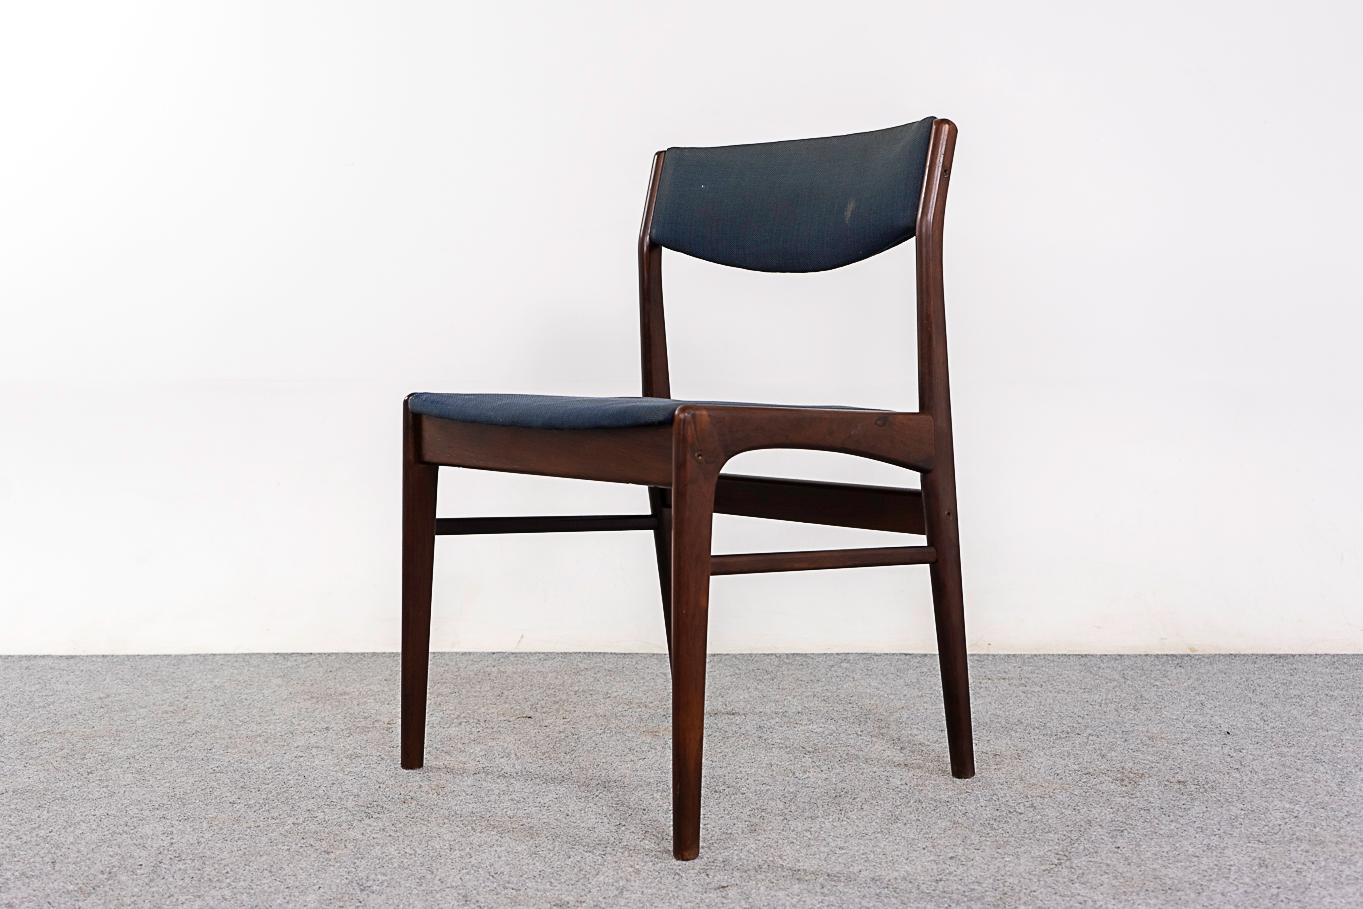 Rosewood mid-century dining chairs, circa 1960's. Curved backrests and generous seat. Solid frame with cross braces for added stability and support. Original upholstery with wear.

Unrestored item with option to purchase in restored condition for